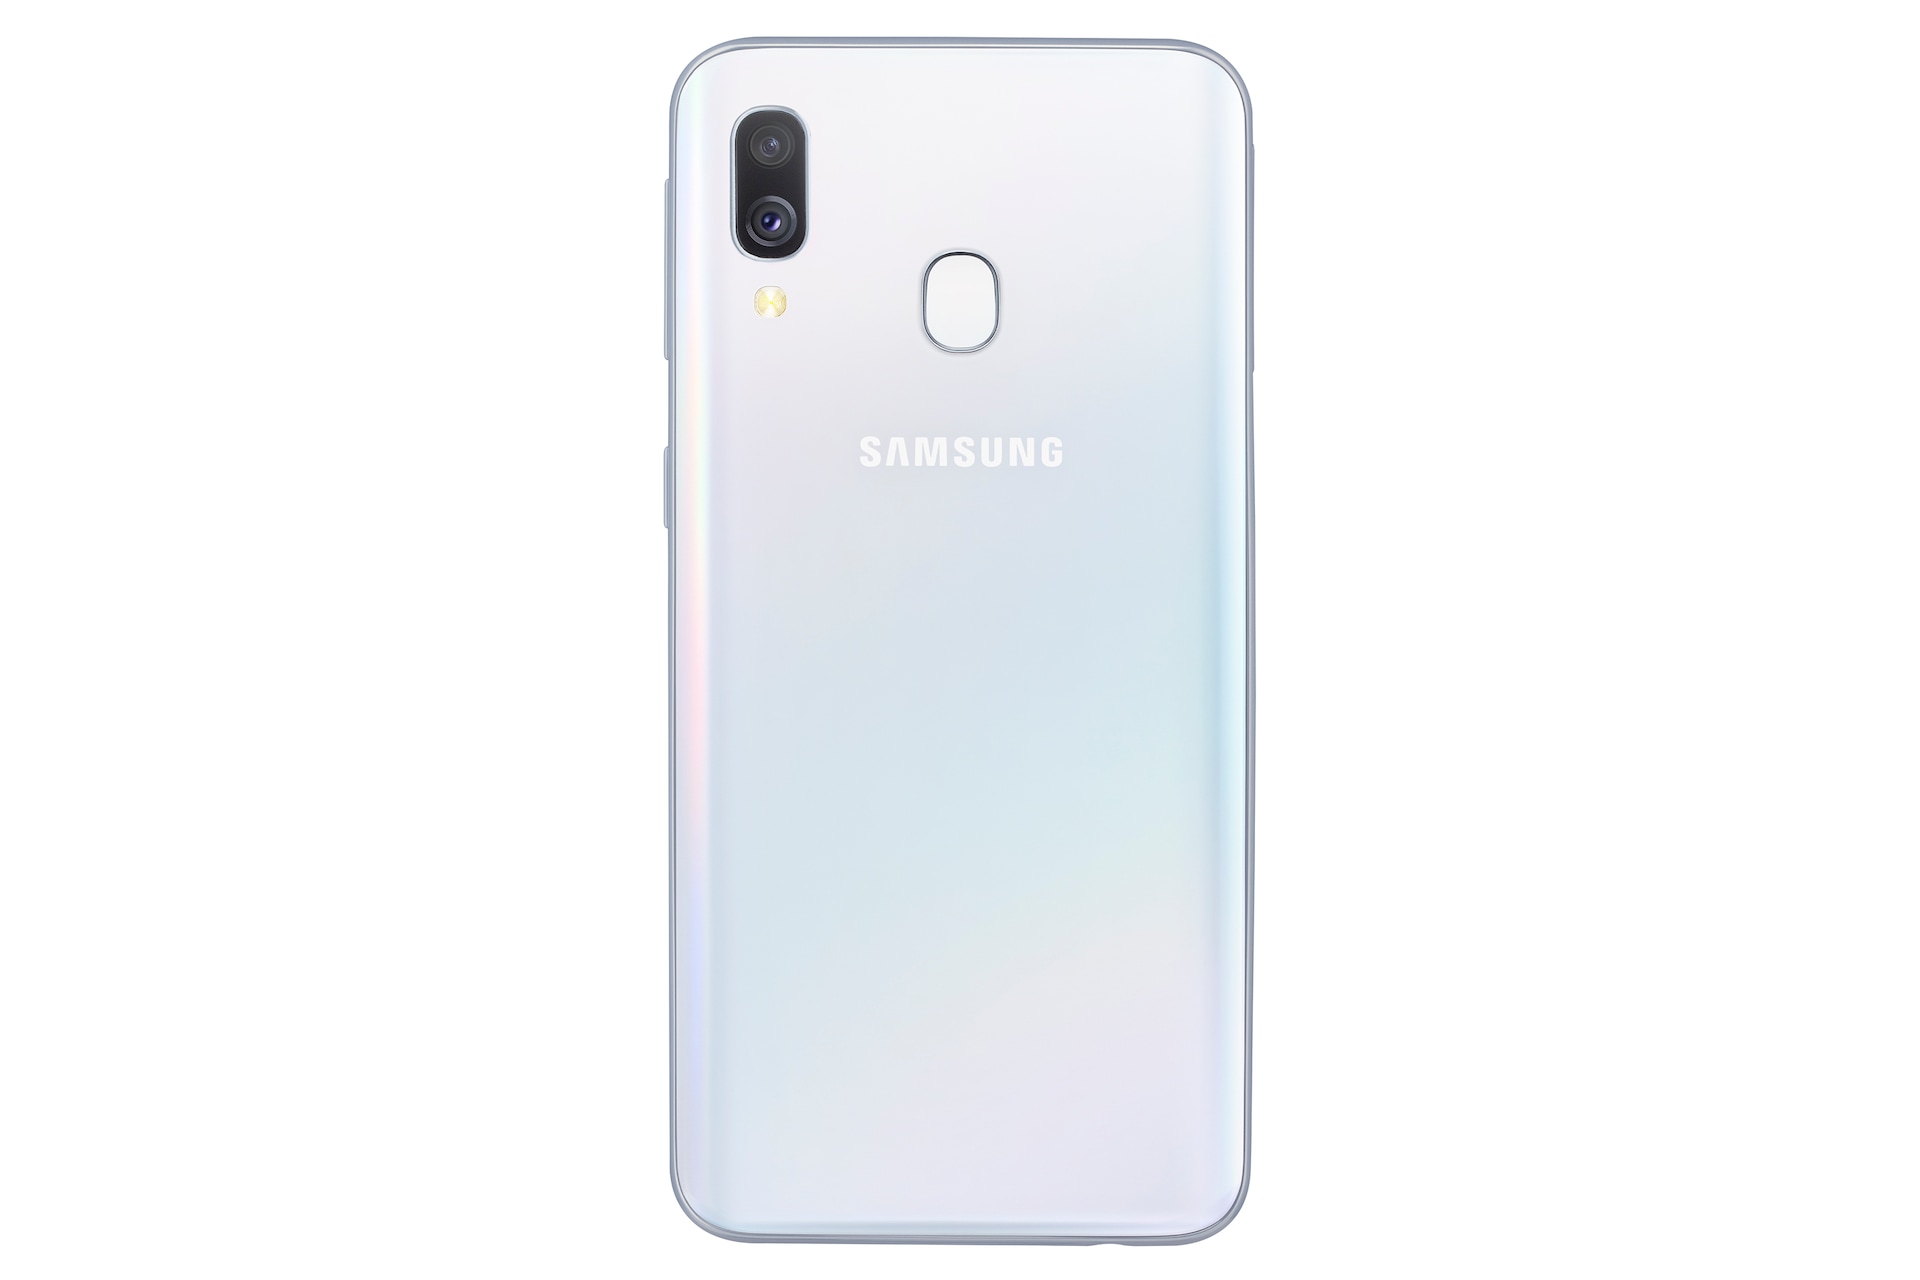 Samsung Galaxy A40 - Full phone specifications